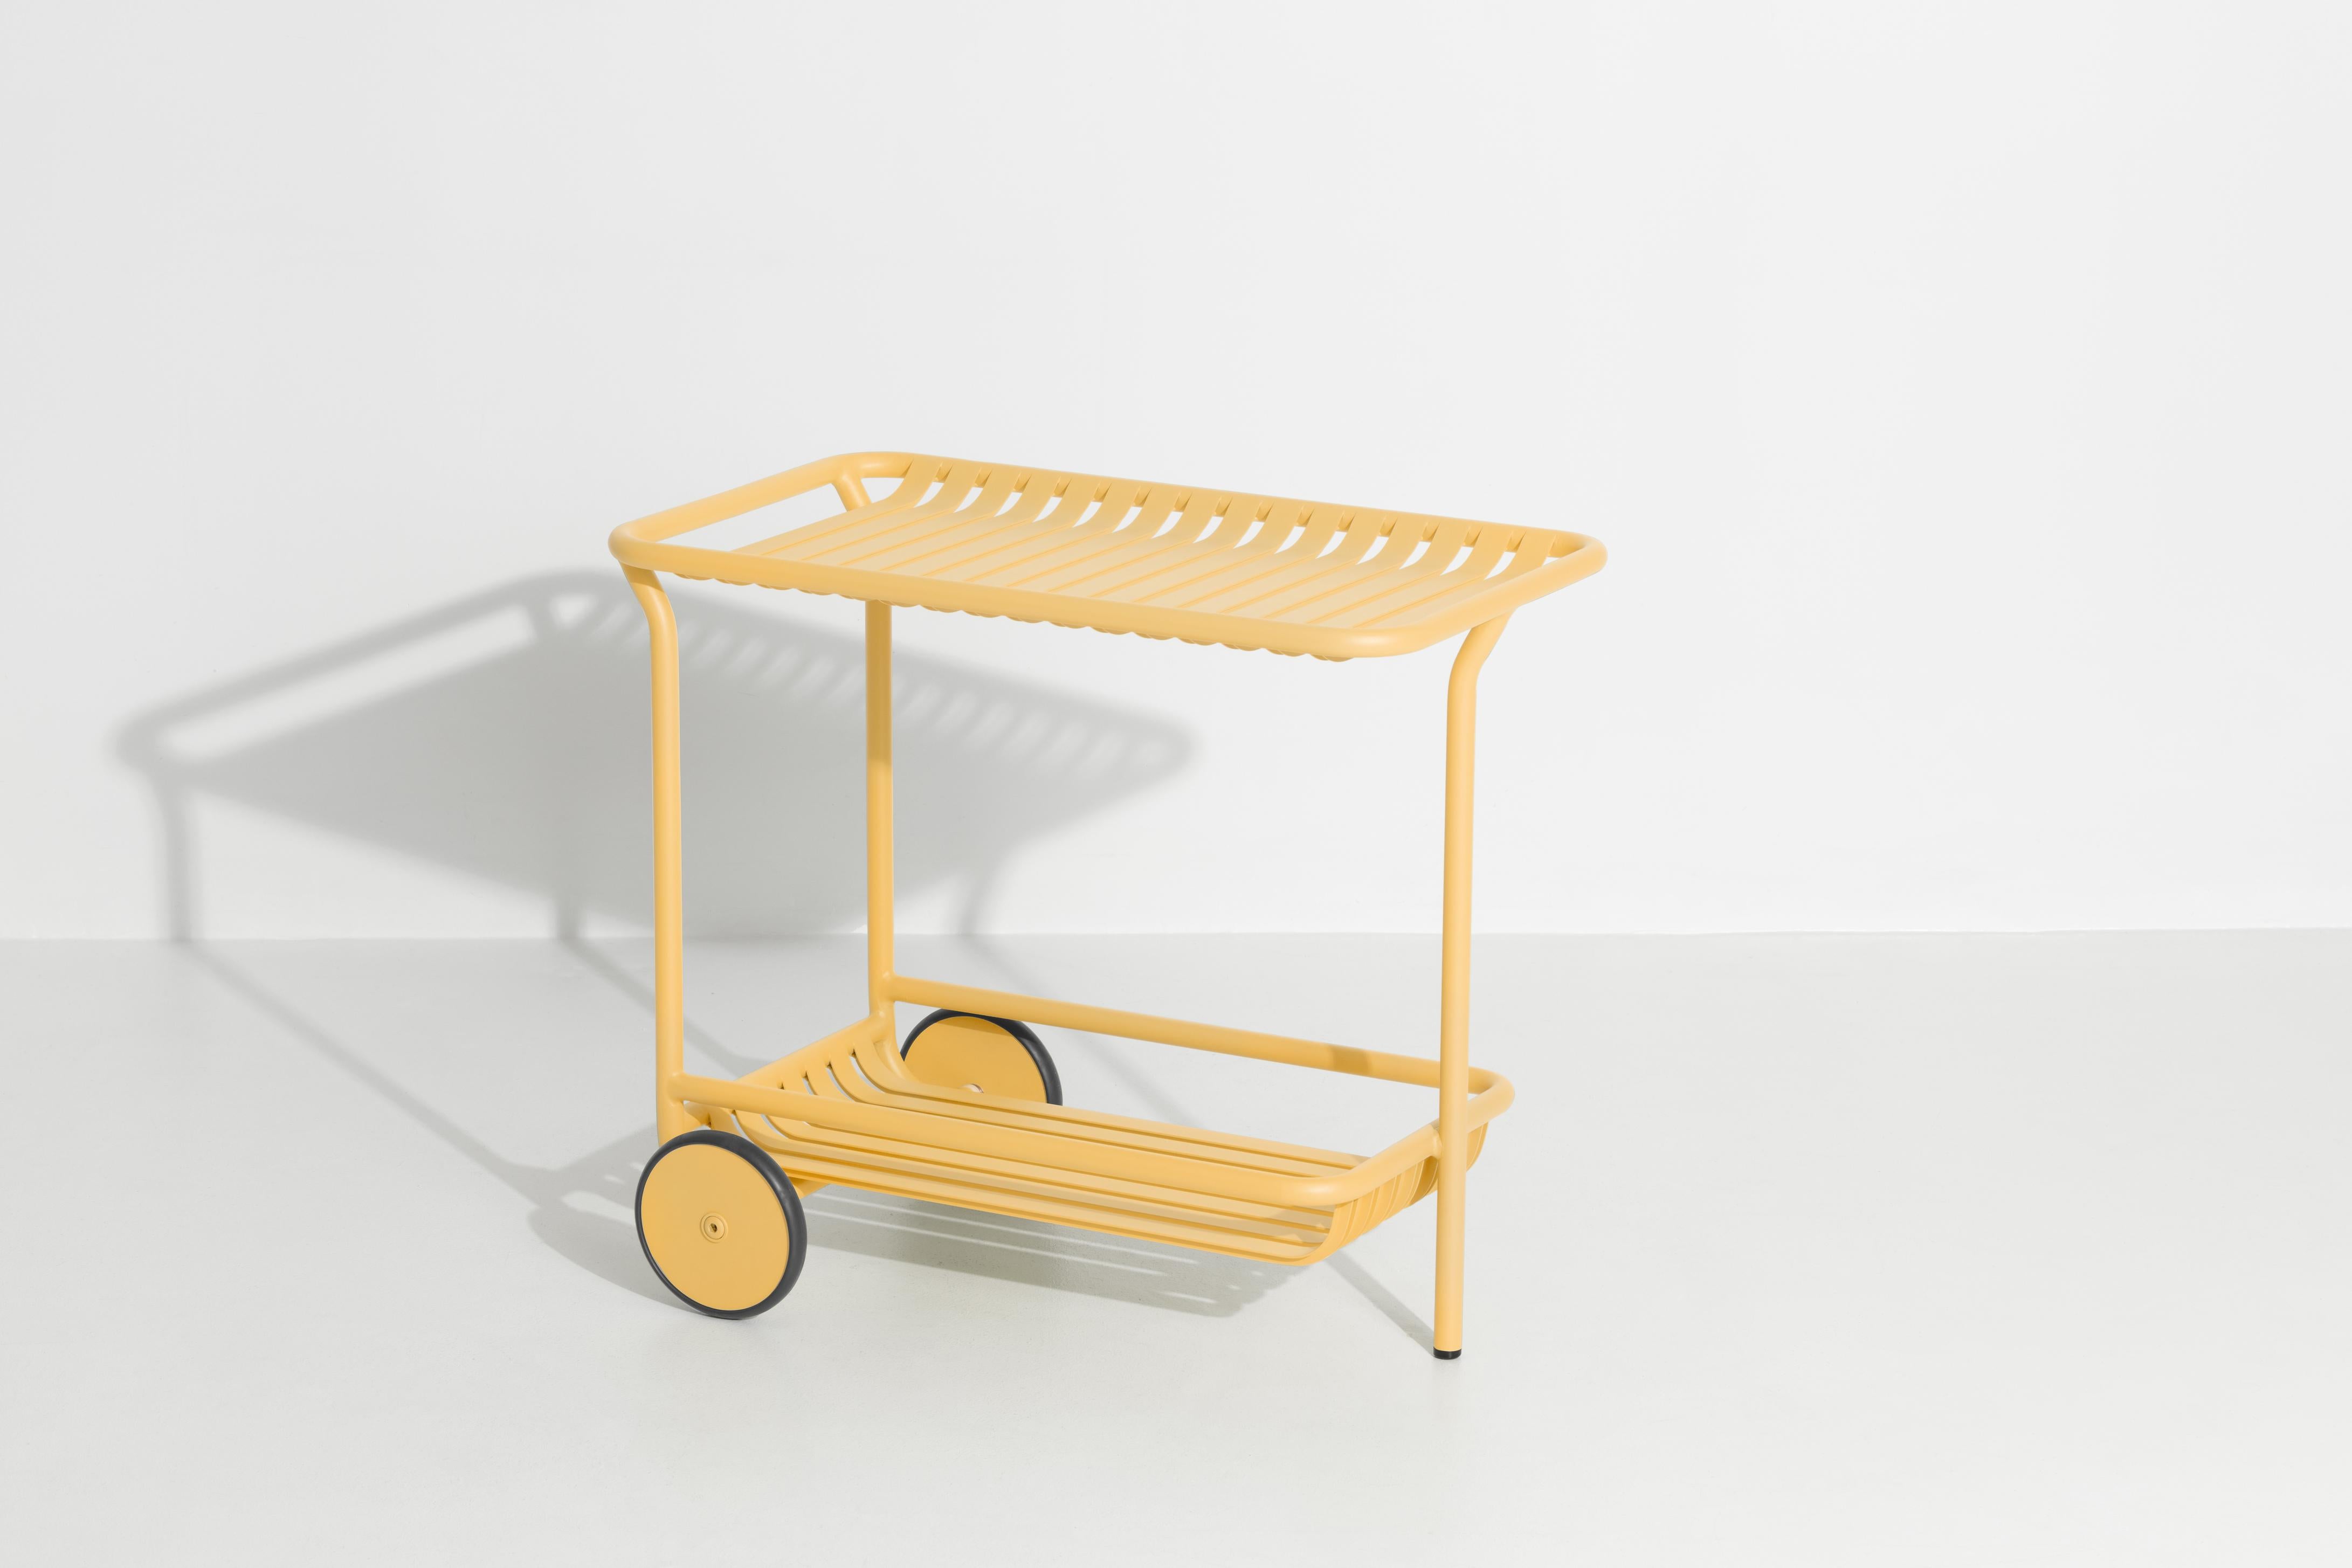 Petite Friture Week-End Trolley in Saffron Aluminium by Studio BrichetZiegler, 2017

The week-end collection is a full range of outdoor furniture, in aluminium grained epoxy paint, matt finish, that includes 18 functions and 8 colours for the